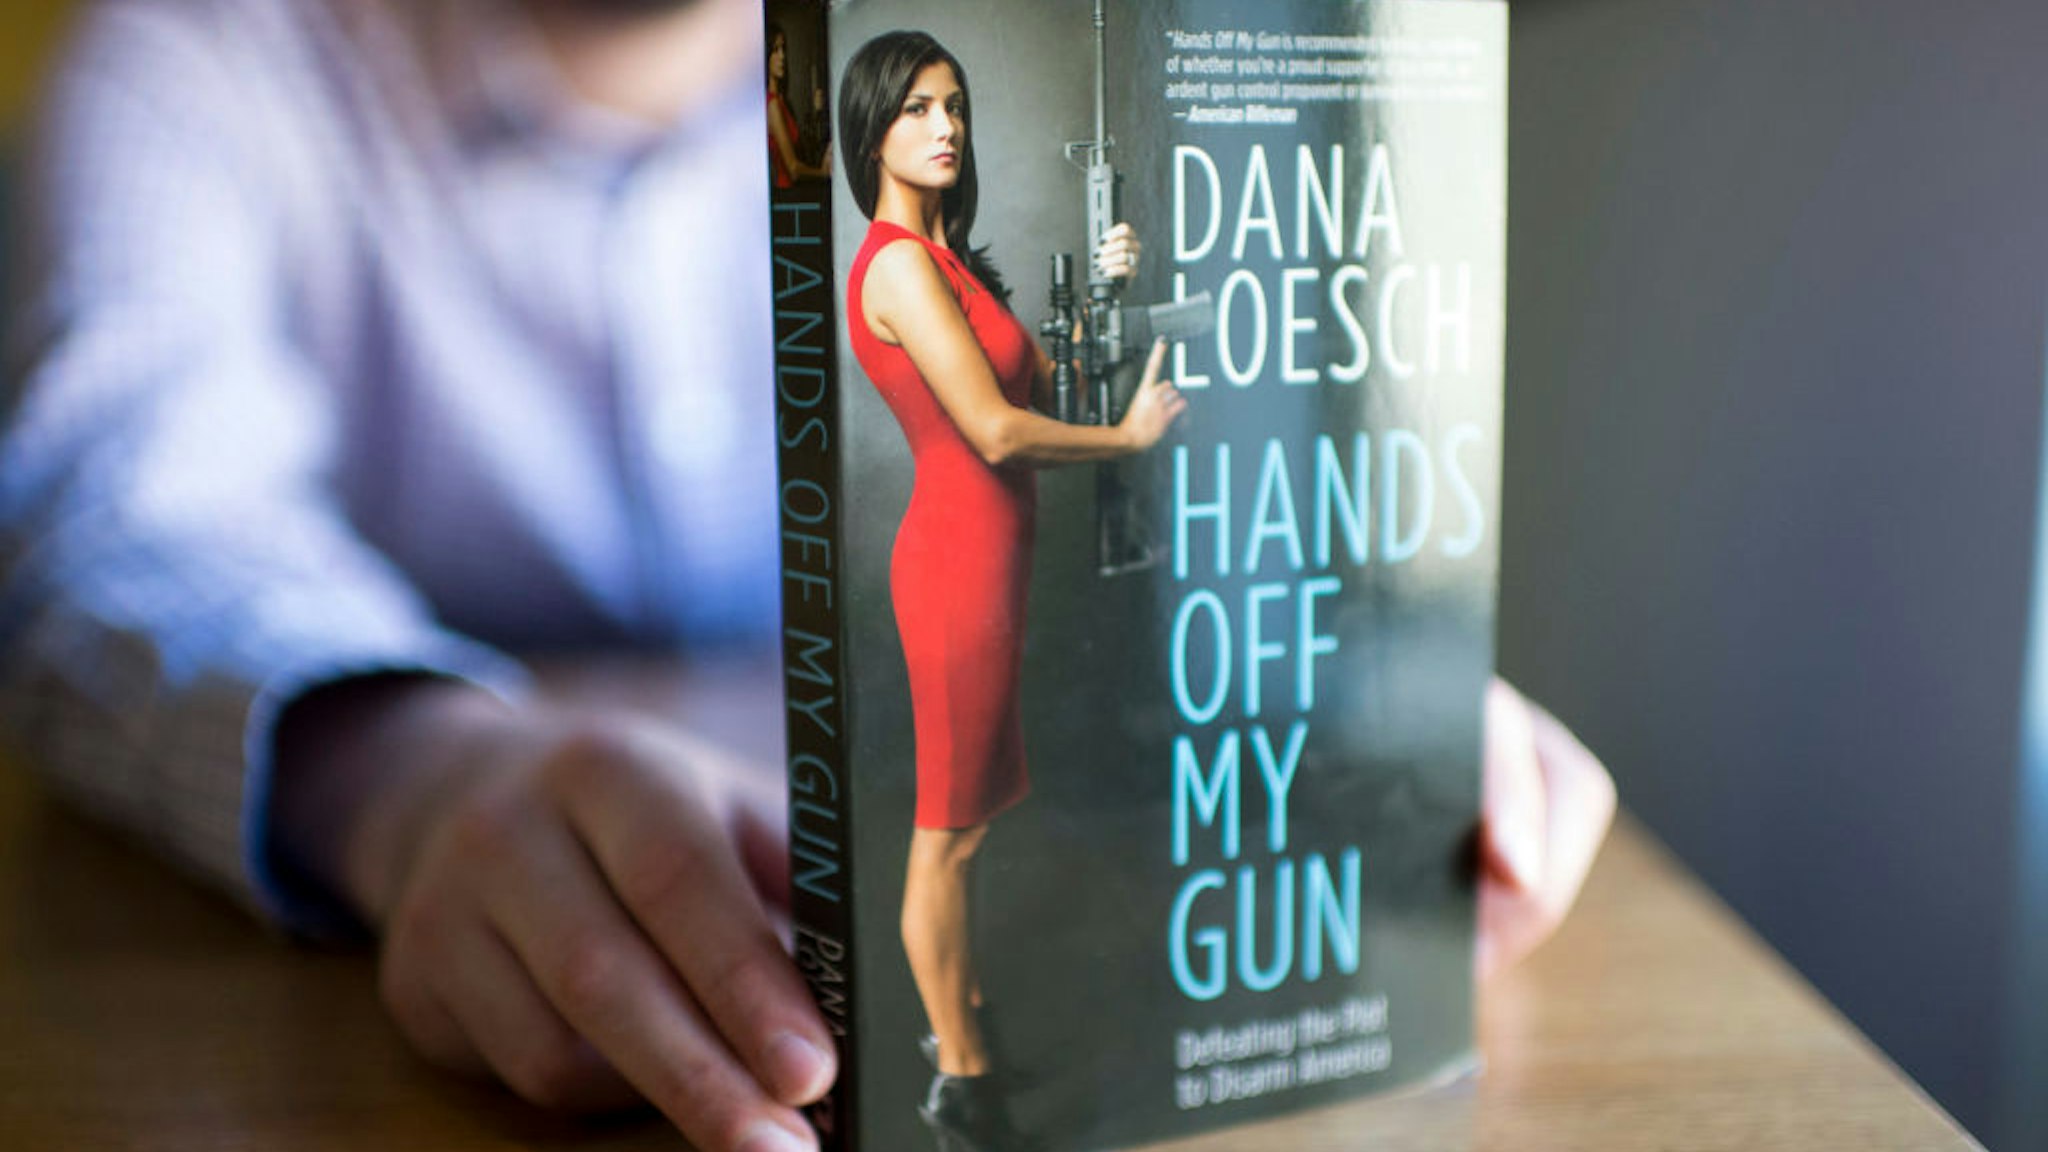 A man reads "Hands off my gun" written by the NRA Spokeperson Dana Loesch in Washington DC on February 8, 2018. Each time there's another mass shooting in the United States, Shannon Watts and Dana Loesch take to Twitter on opposite ends of the gun debate. Watts, founder of Moms Demand Action for Gun Sense in America, makes the arguments for stricter gun control in a country with 33,000 gun-related deaths a year. Loesch, spokeswoman for the National Rifle Association (NRA) and a conservative radio host, lays out the case for why Americans need weapons for self-defense. The two women have become two of the most prominent public faces of the gun control debate with hundreds of thousands of followers across the United States. / AFP PHOTO / Eric BARADAT (Photo credit should read ERIC BARADAT/AFP via Getty Images)